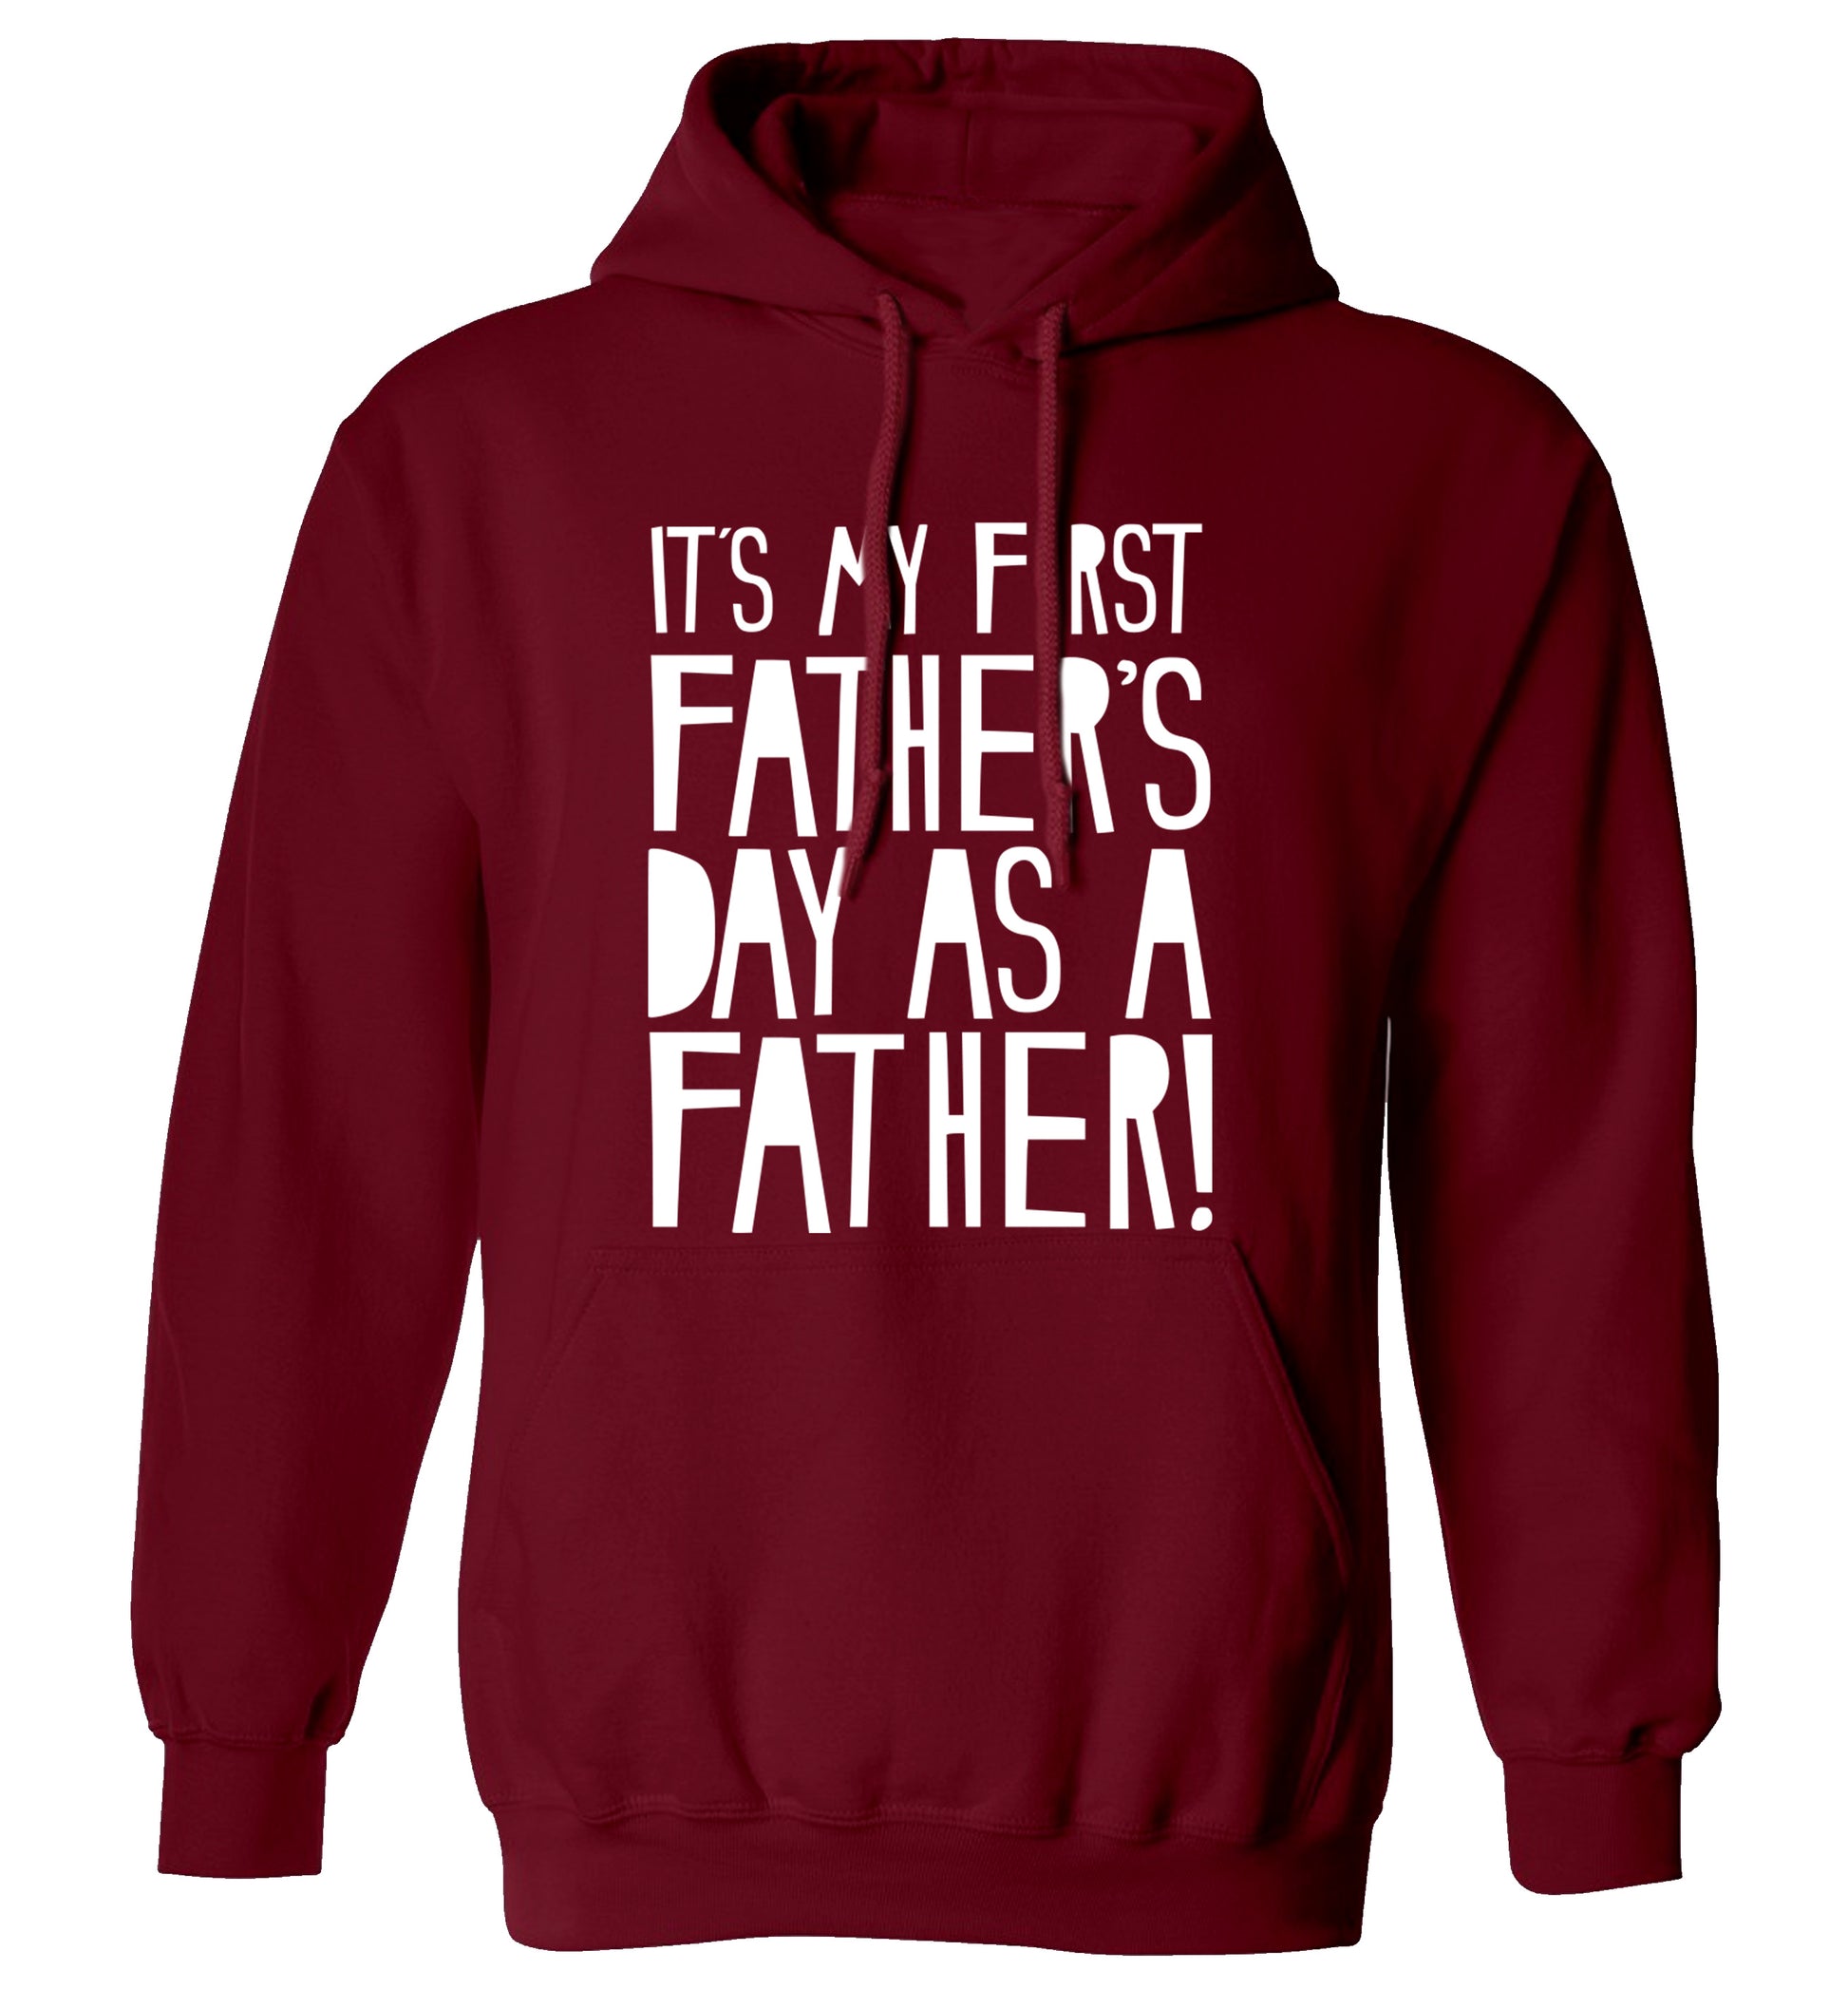 It's my first Father's Day as a father! adults unisex maroon hoodie 2XL